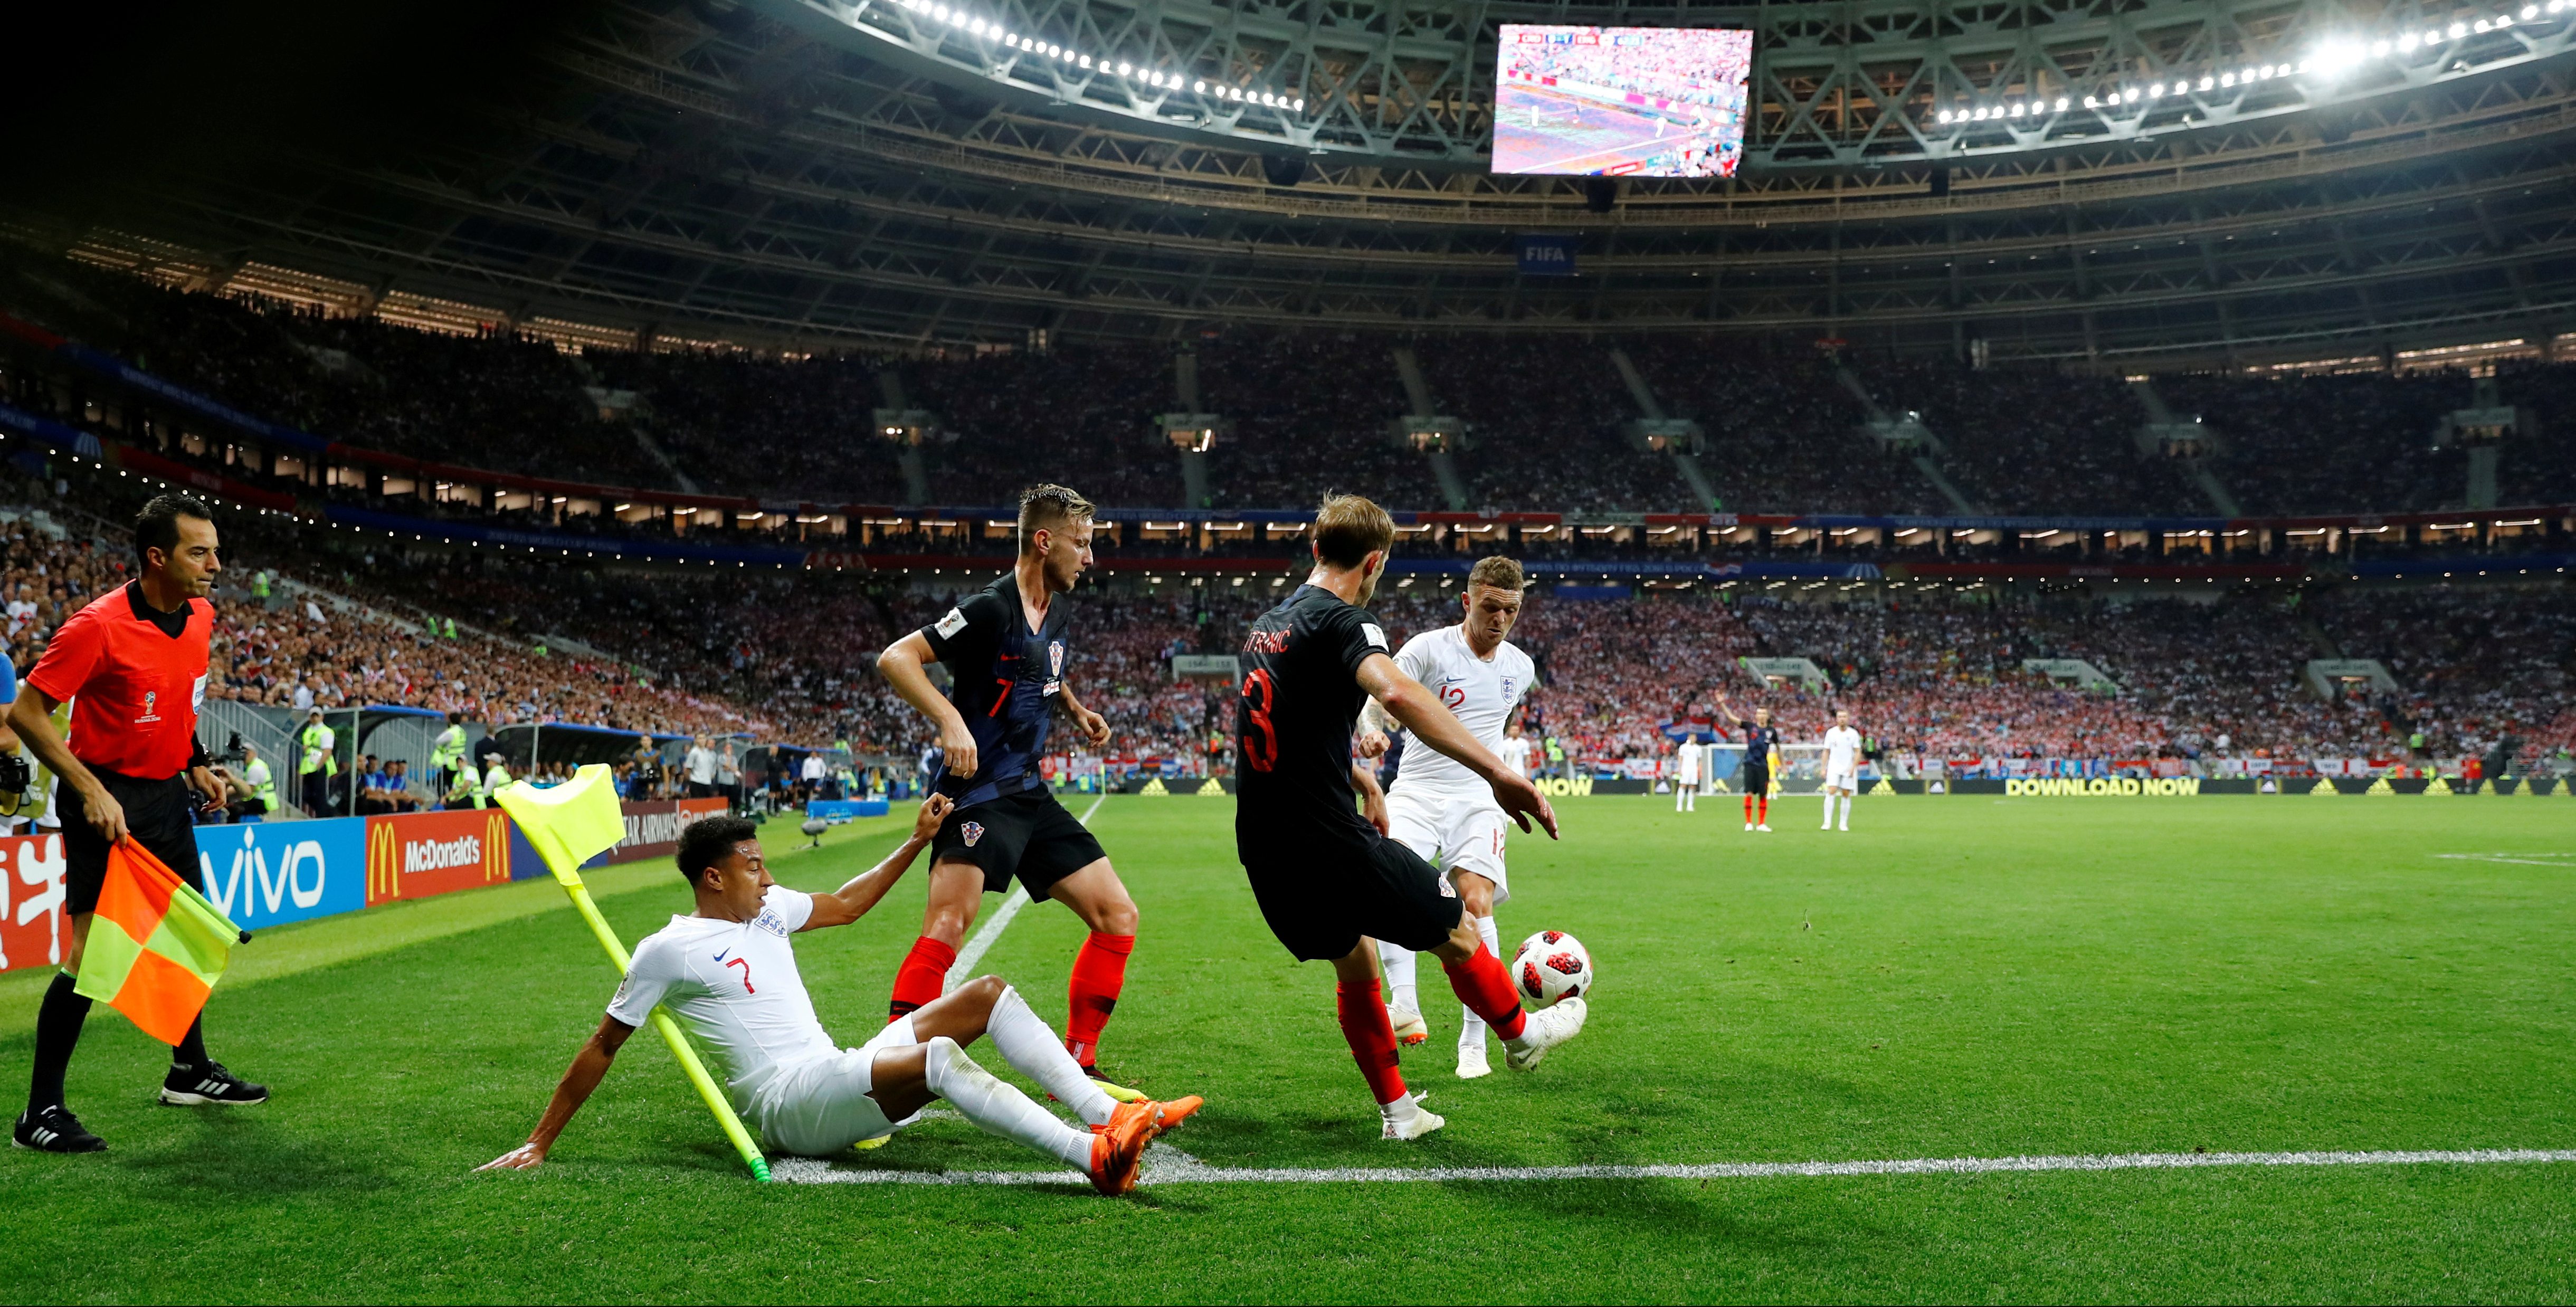 What we learned from watching the World Cup Brookings